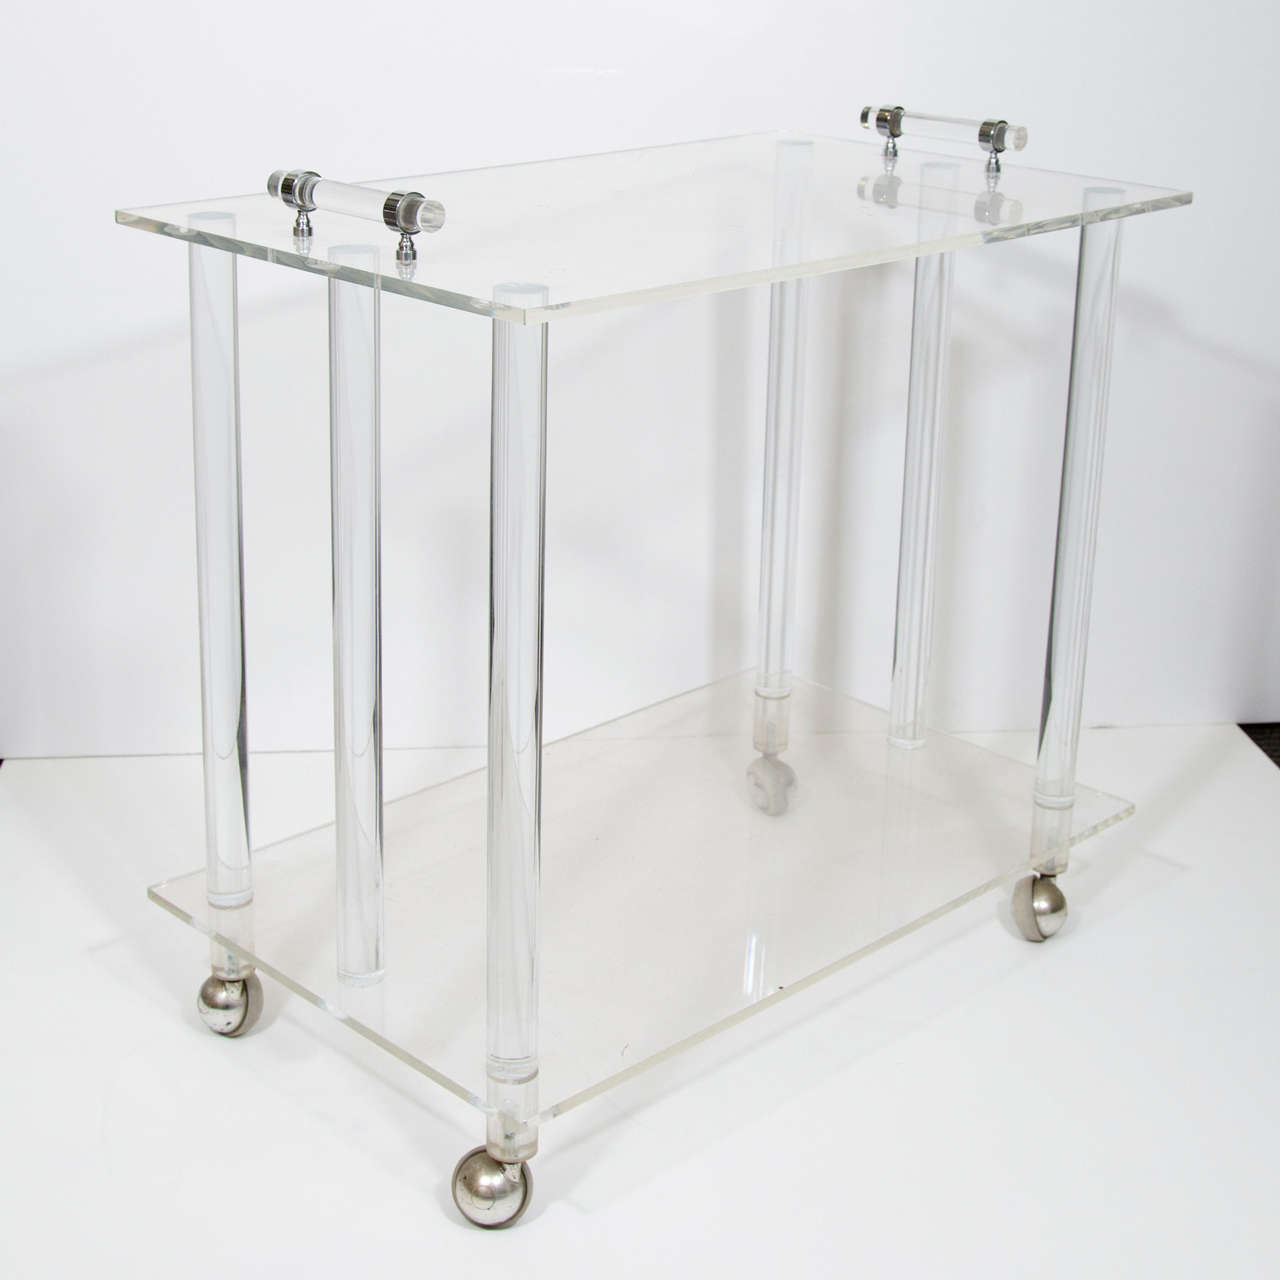 A vintage, highly modernistic two-tier service and bar cart, produced circa 1970's, with push handles, the two surfaces supported by six cylindrical columns, entirely in lucite, on casters. This cart can elegantly display your barware, spirits, and